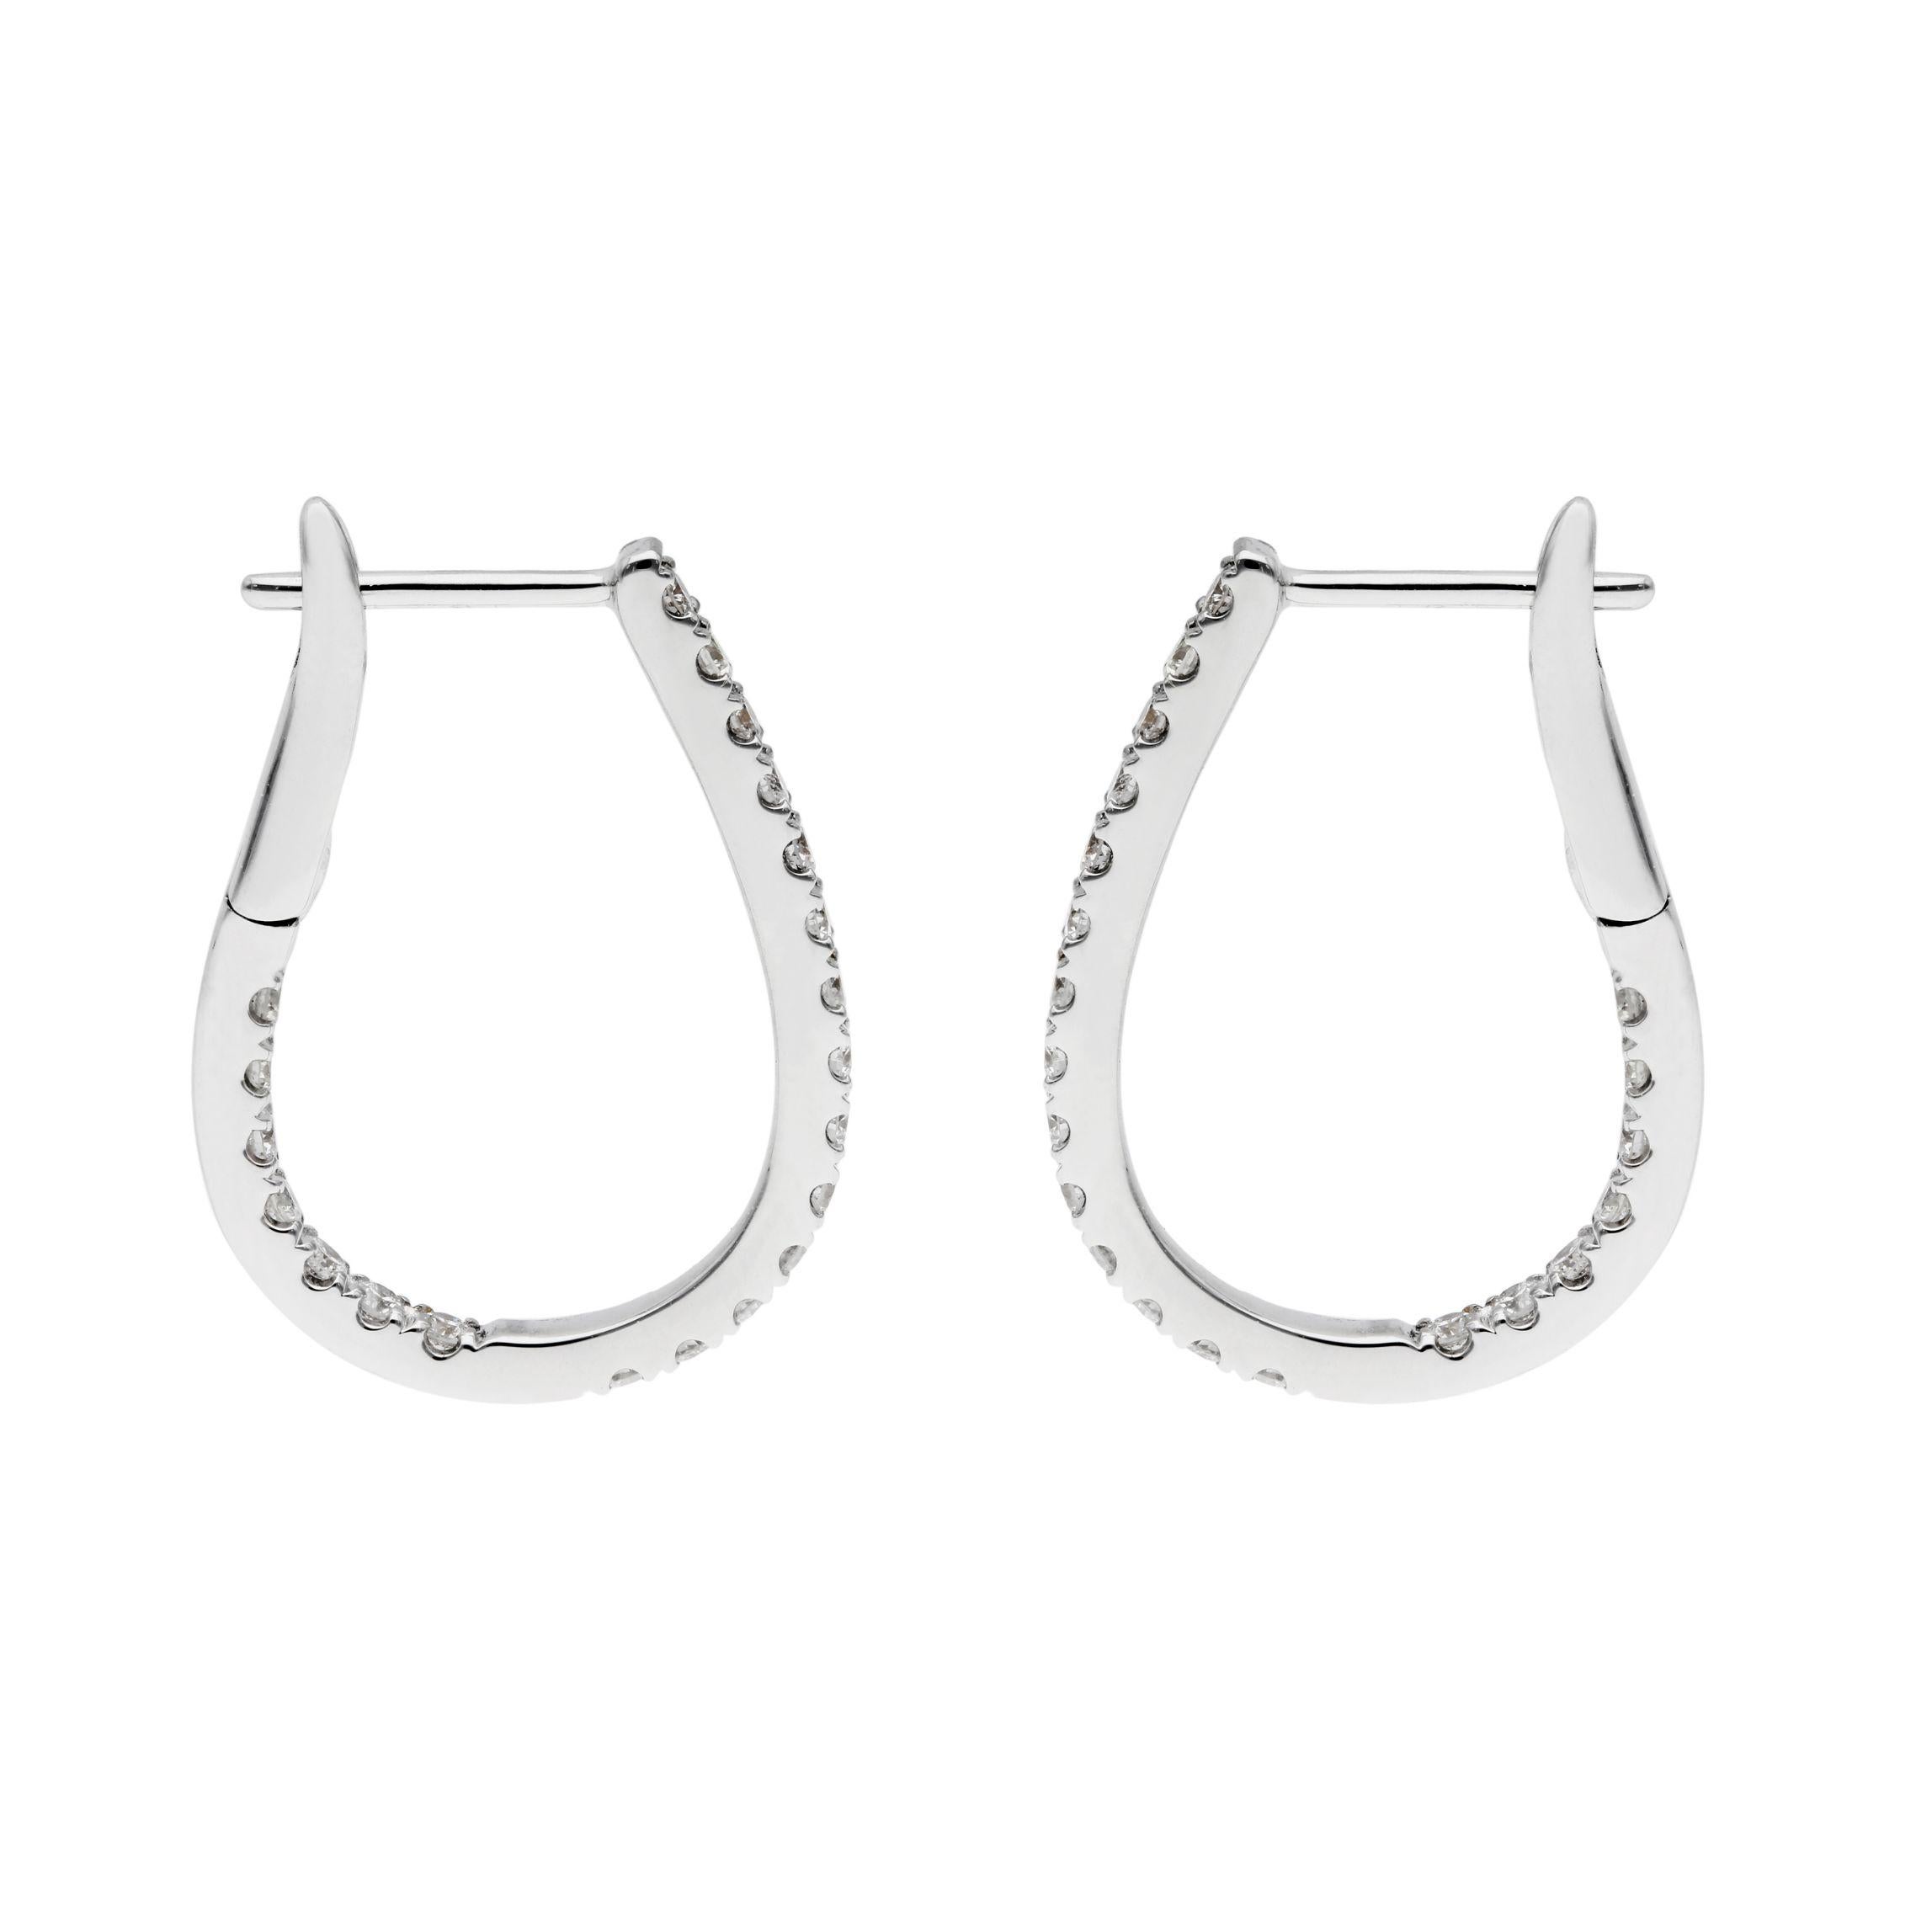 Discover the epitome of sophisticated glamour with our 18ct White Gold 22mm Diamond Hinged Hoop Earrings. Uniquely designed in a chic horseshoe shape, these earrings add a modern twist to the classic hoop. The front and inside back of each earring